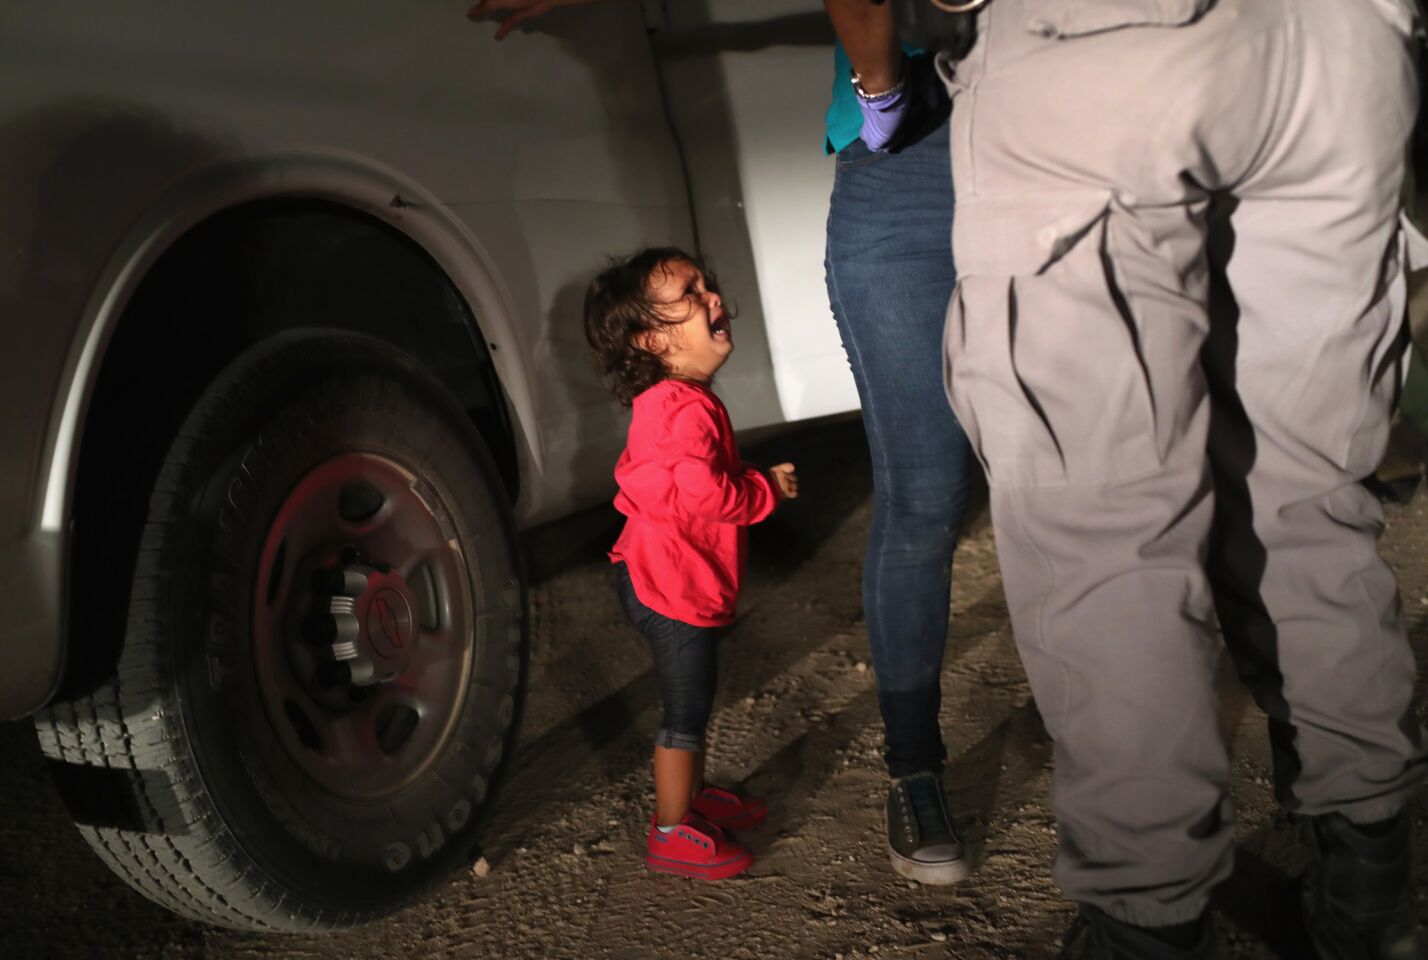 A 2-year-old cries as her mother is searched near the U.S.-Mexico border in McAllen, Texas.